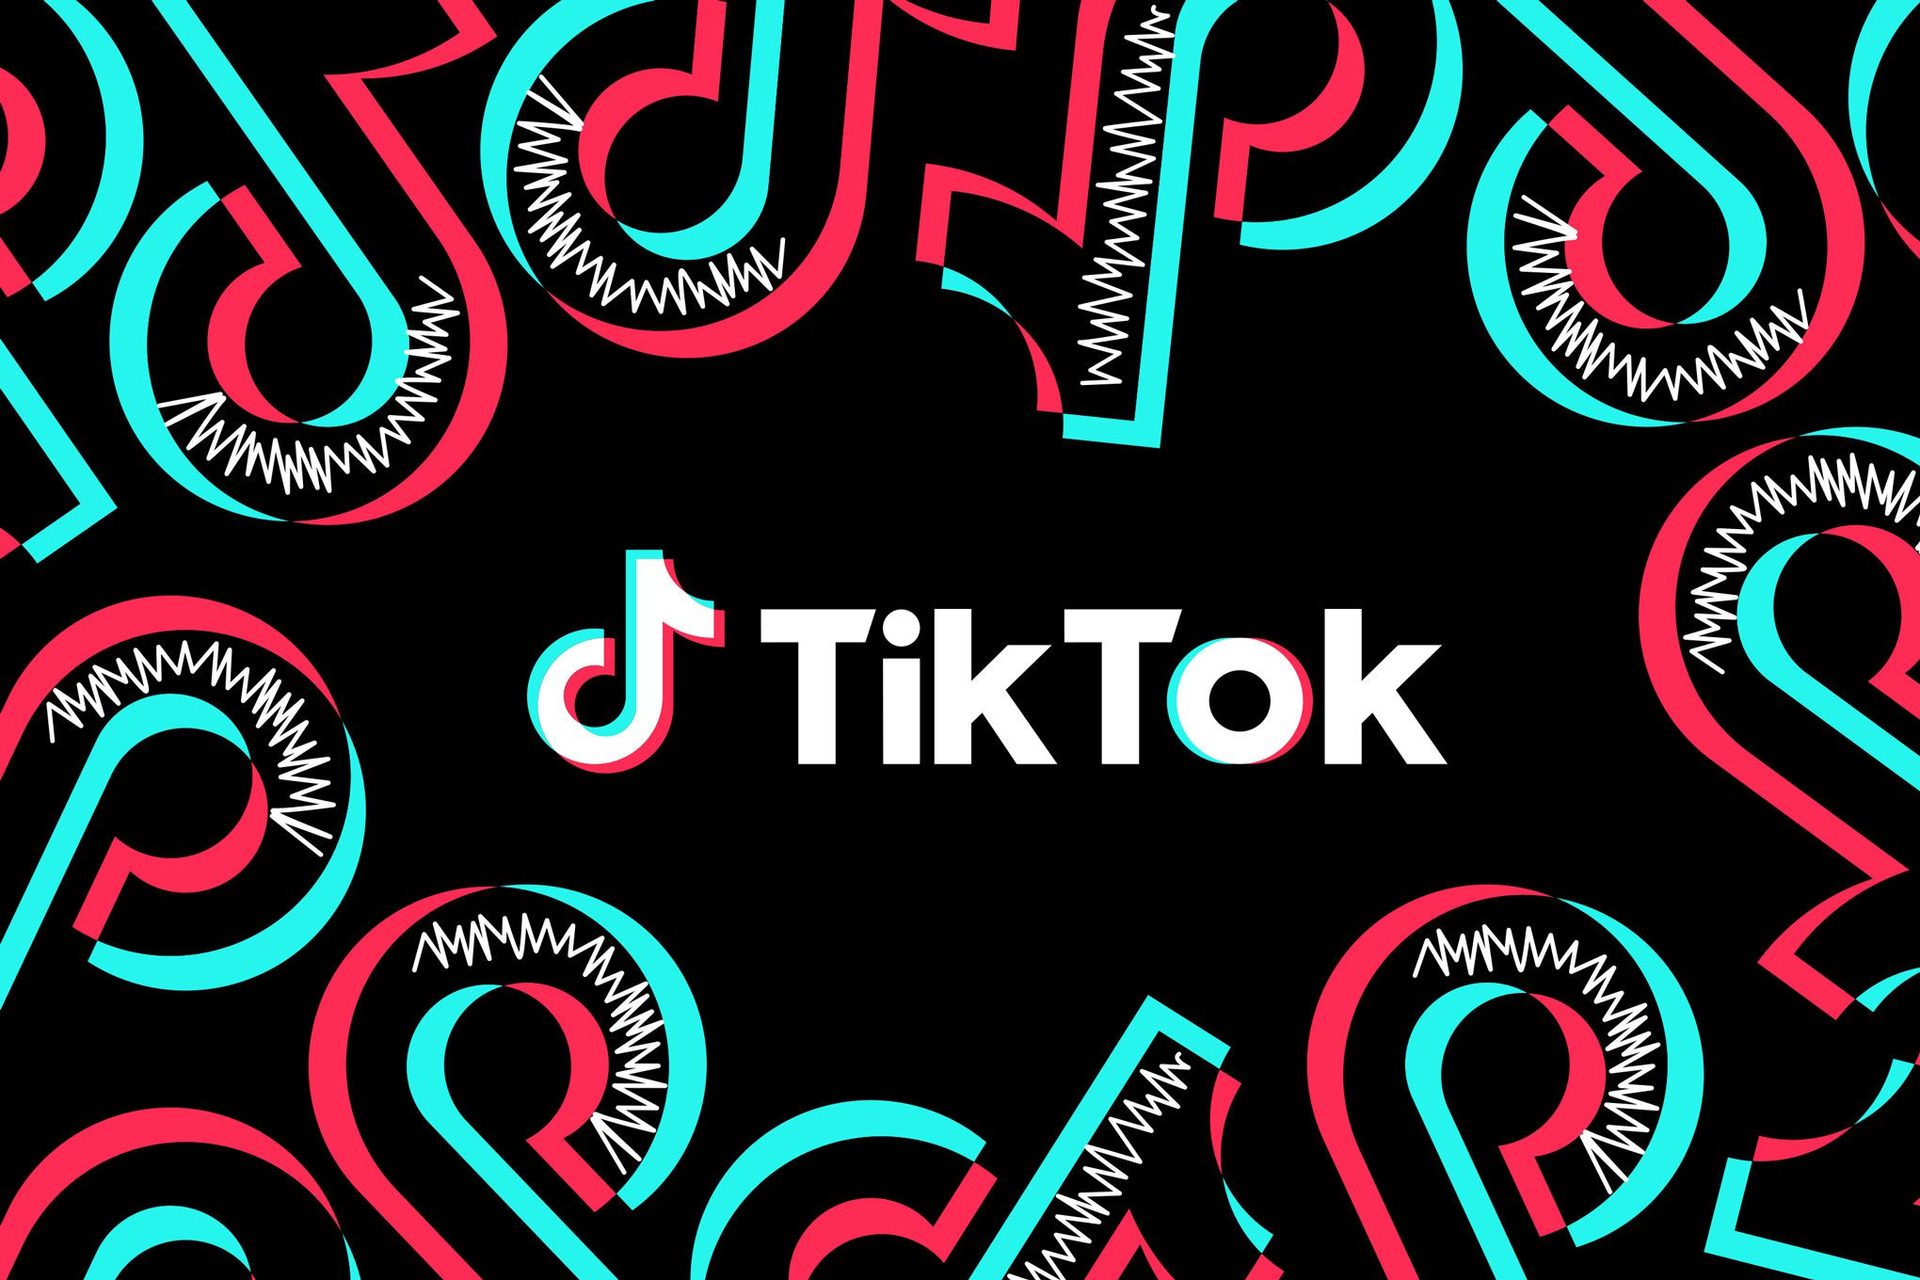 Tiktok data privacy settlement: Website, email, payout